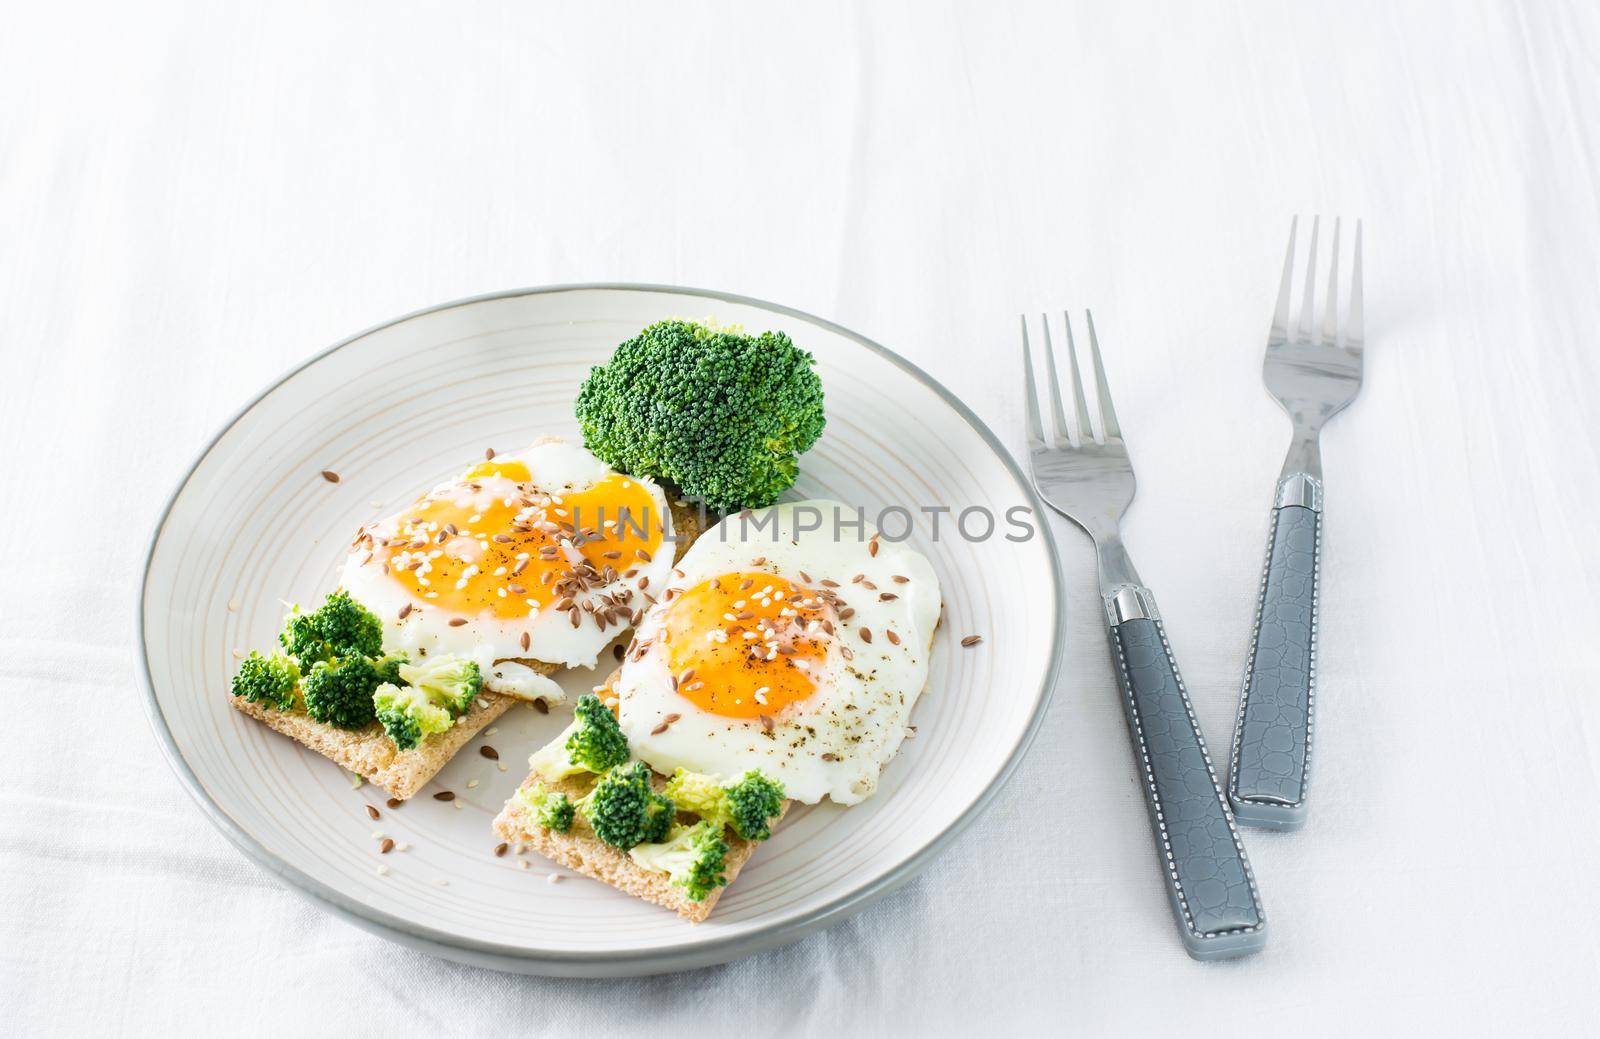 Bruschetta with scrambled eggs and broccoli on a grain crispbread with sesame seeds and flaxseed on a plate on the table by Aleruana